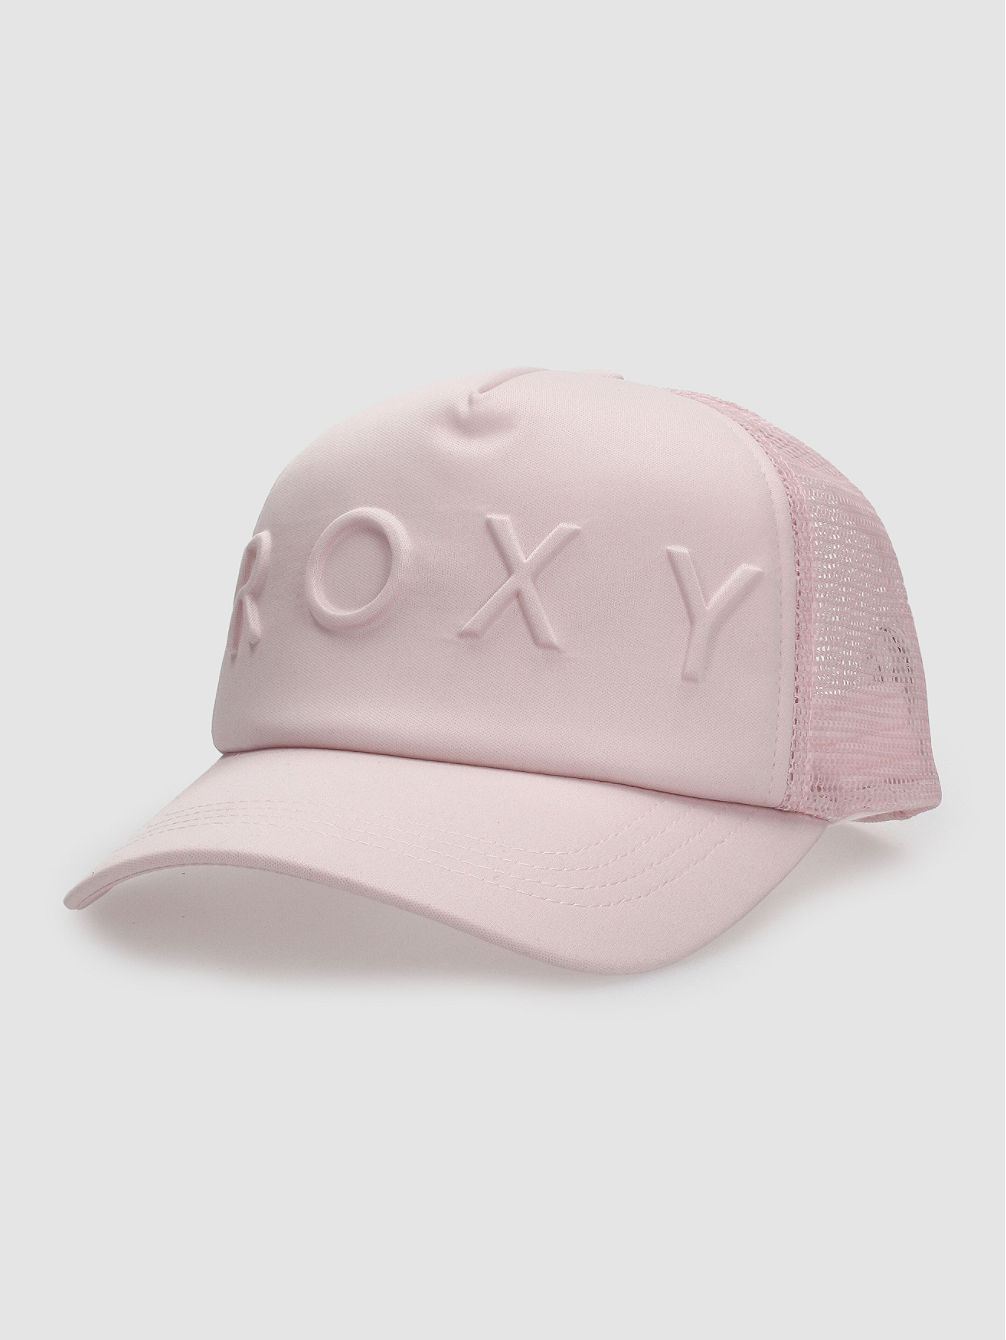 Roxy Brighter Day Cap - buy at Blue Tomato